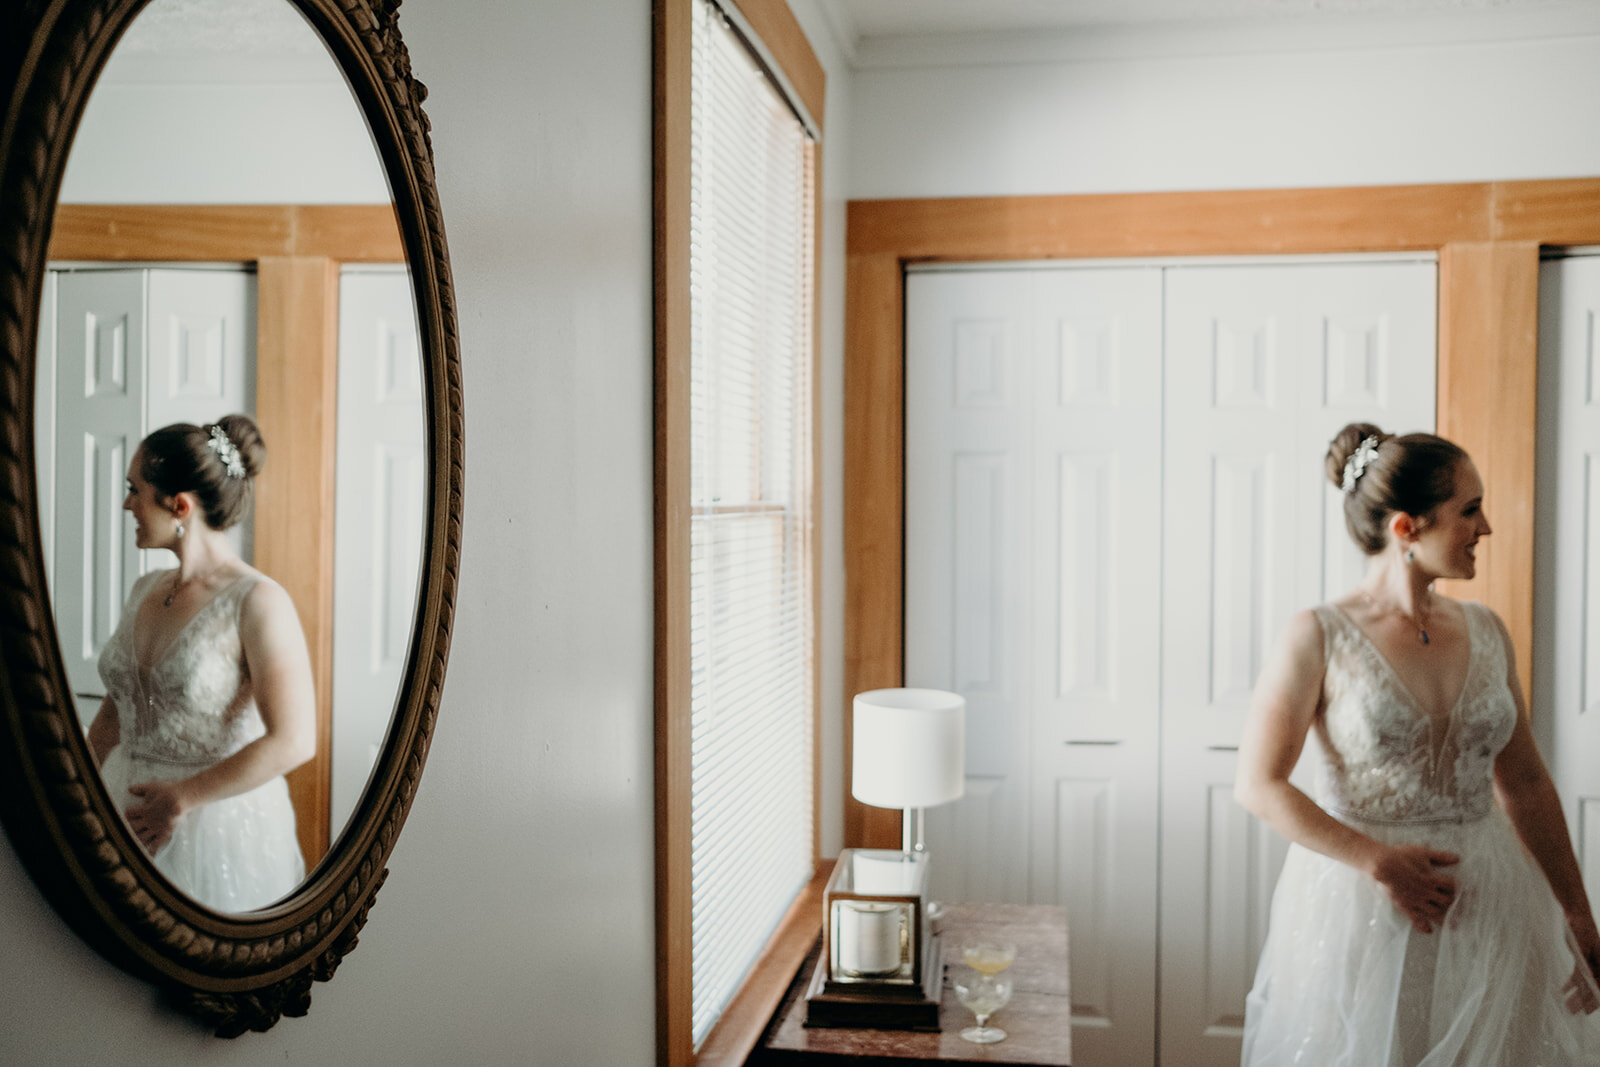 A bride looks at her sister while her image is reflected on her wedding day.